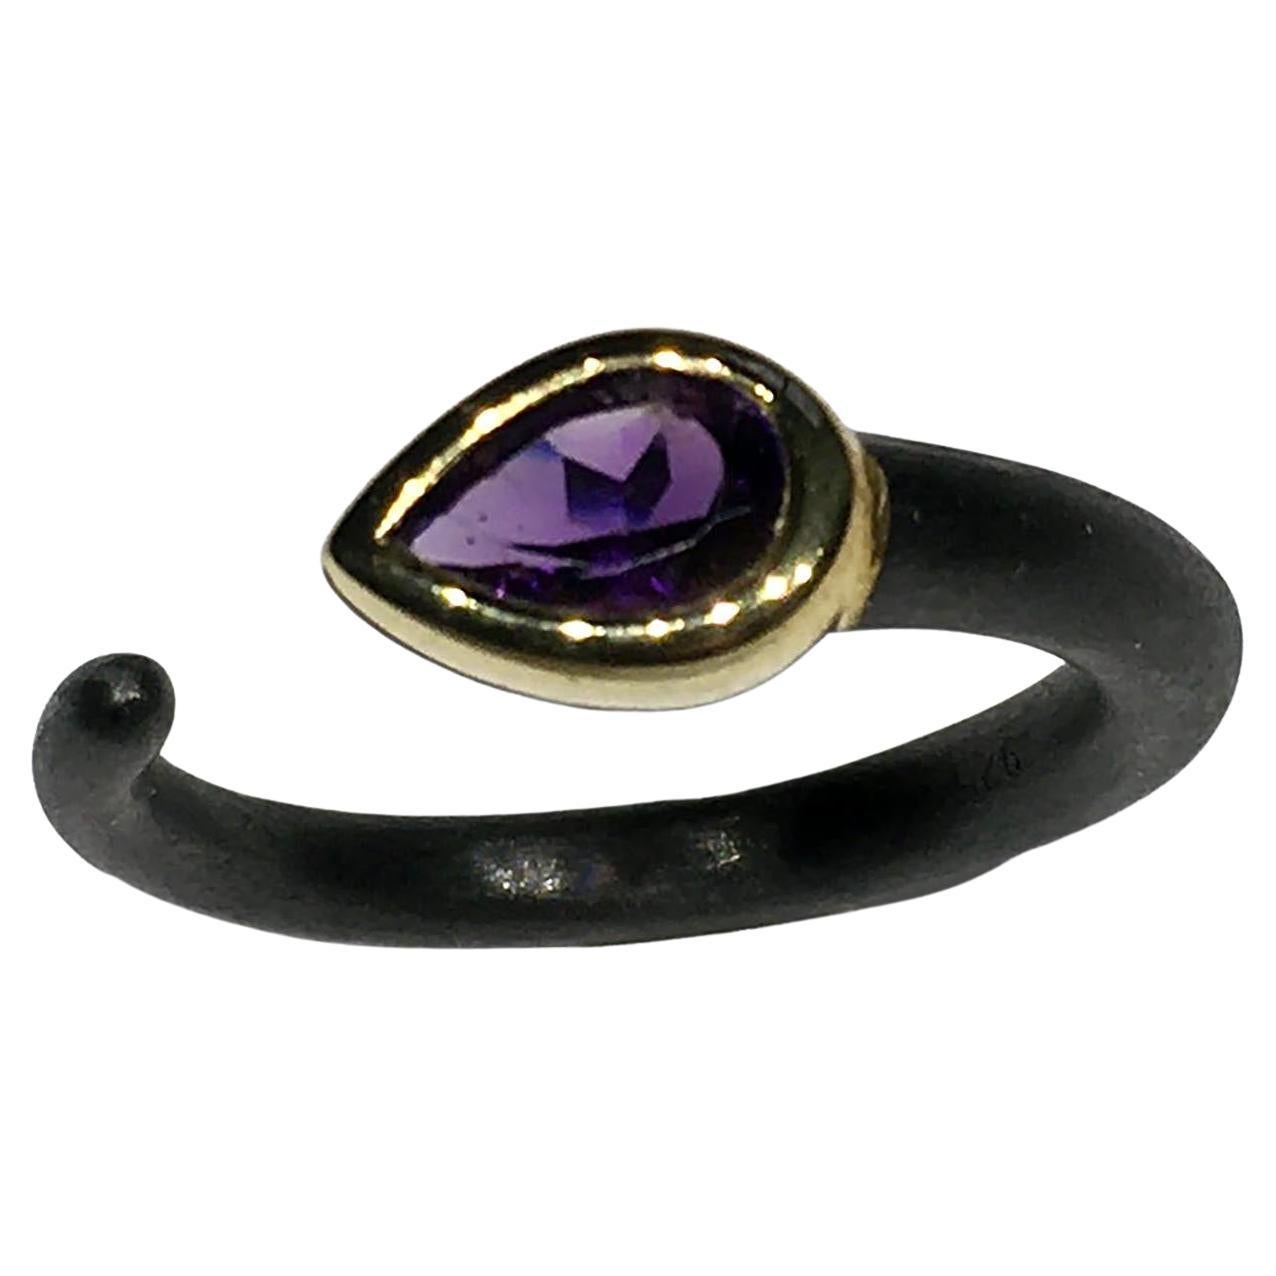 An Amethyst Ring Set in Gold Plated Bezel in a Blackened Silver Band For Sale